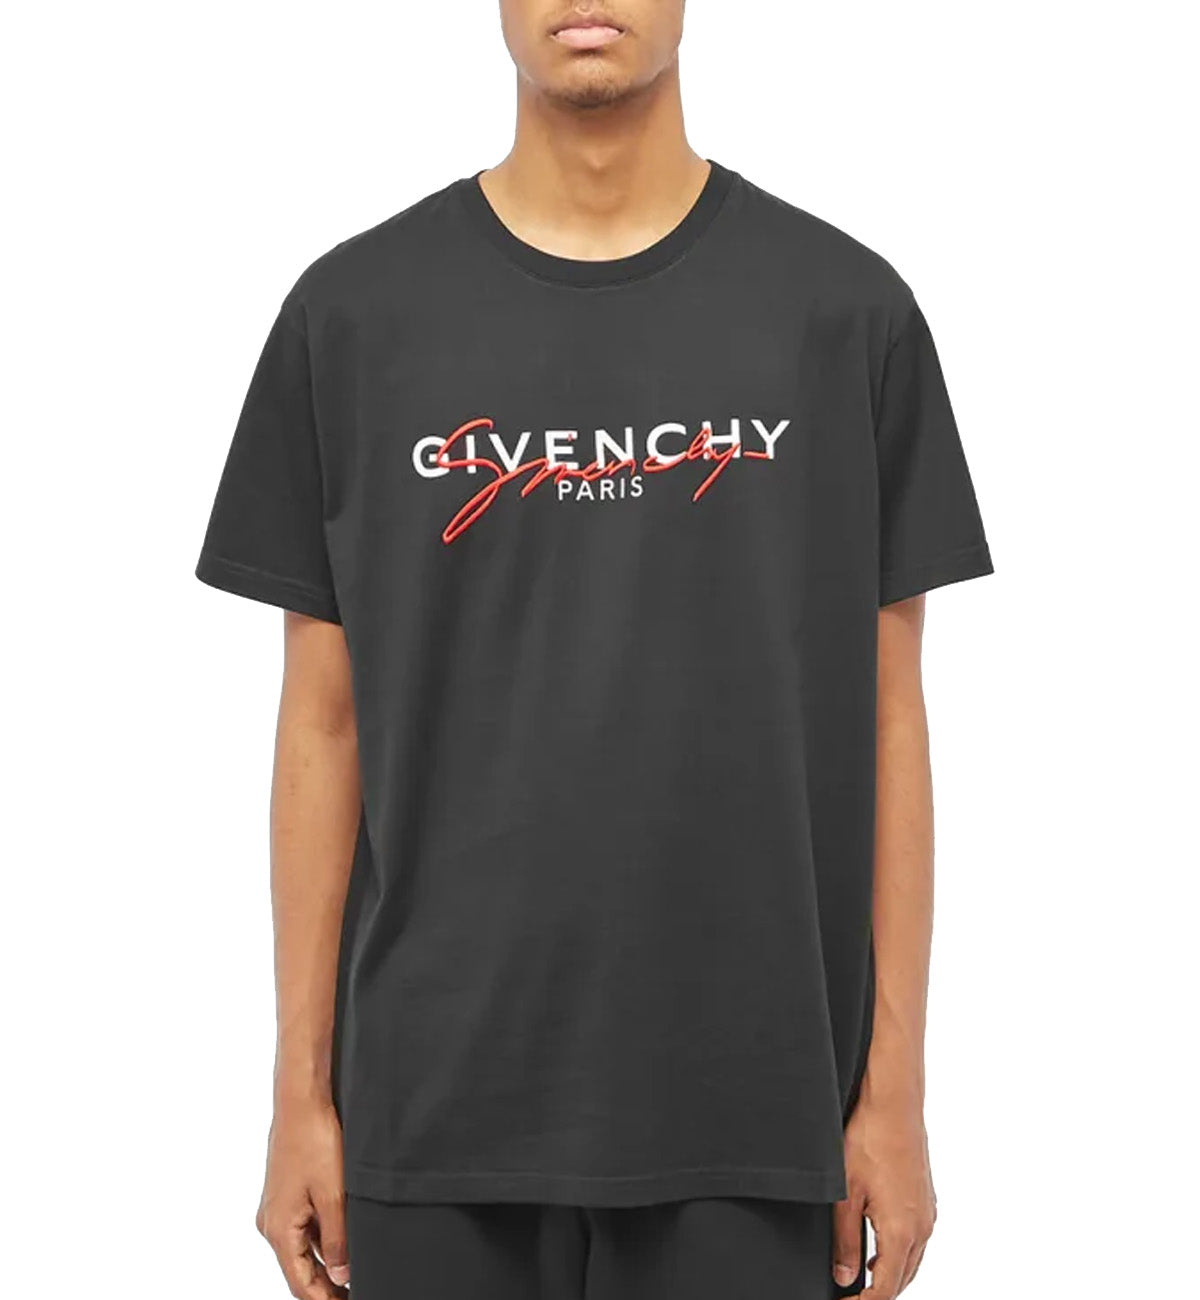 Givenchy Red Embroidery T-Shirt (Black)